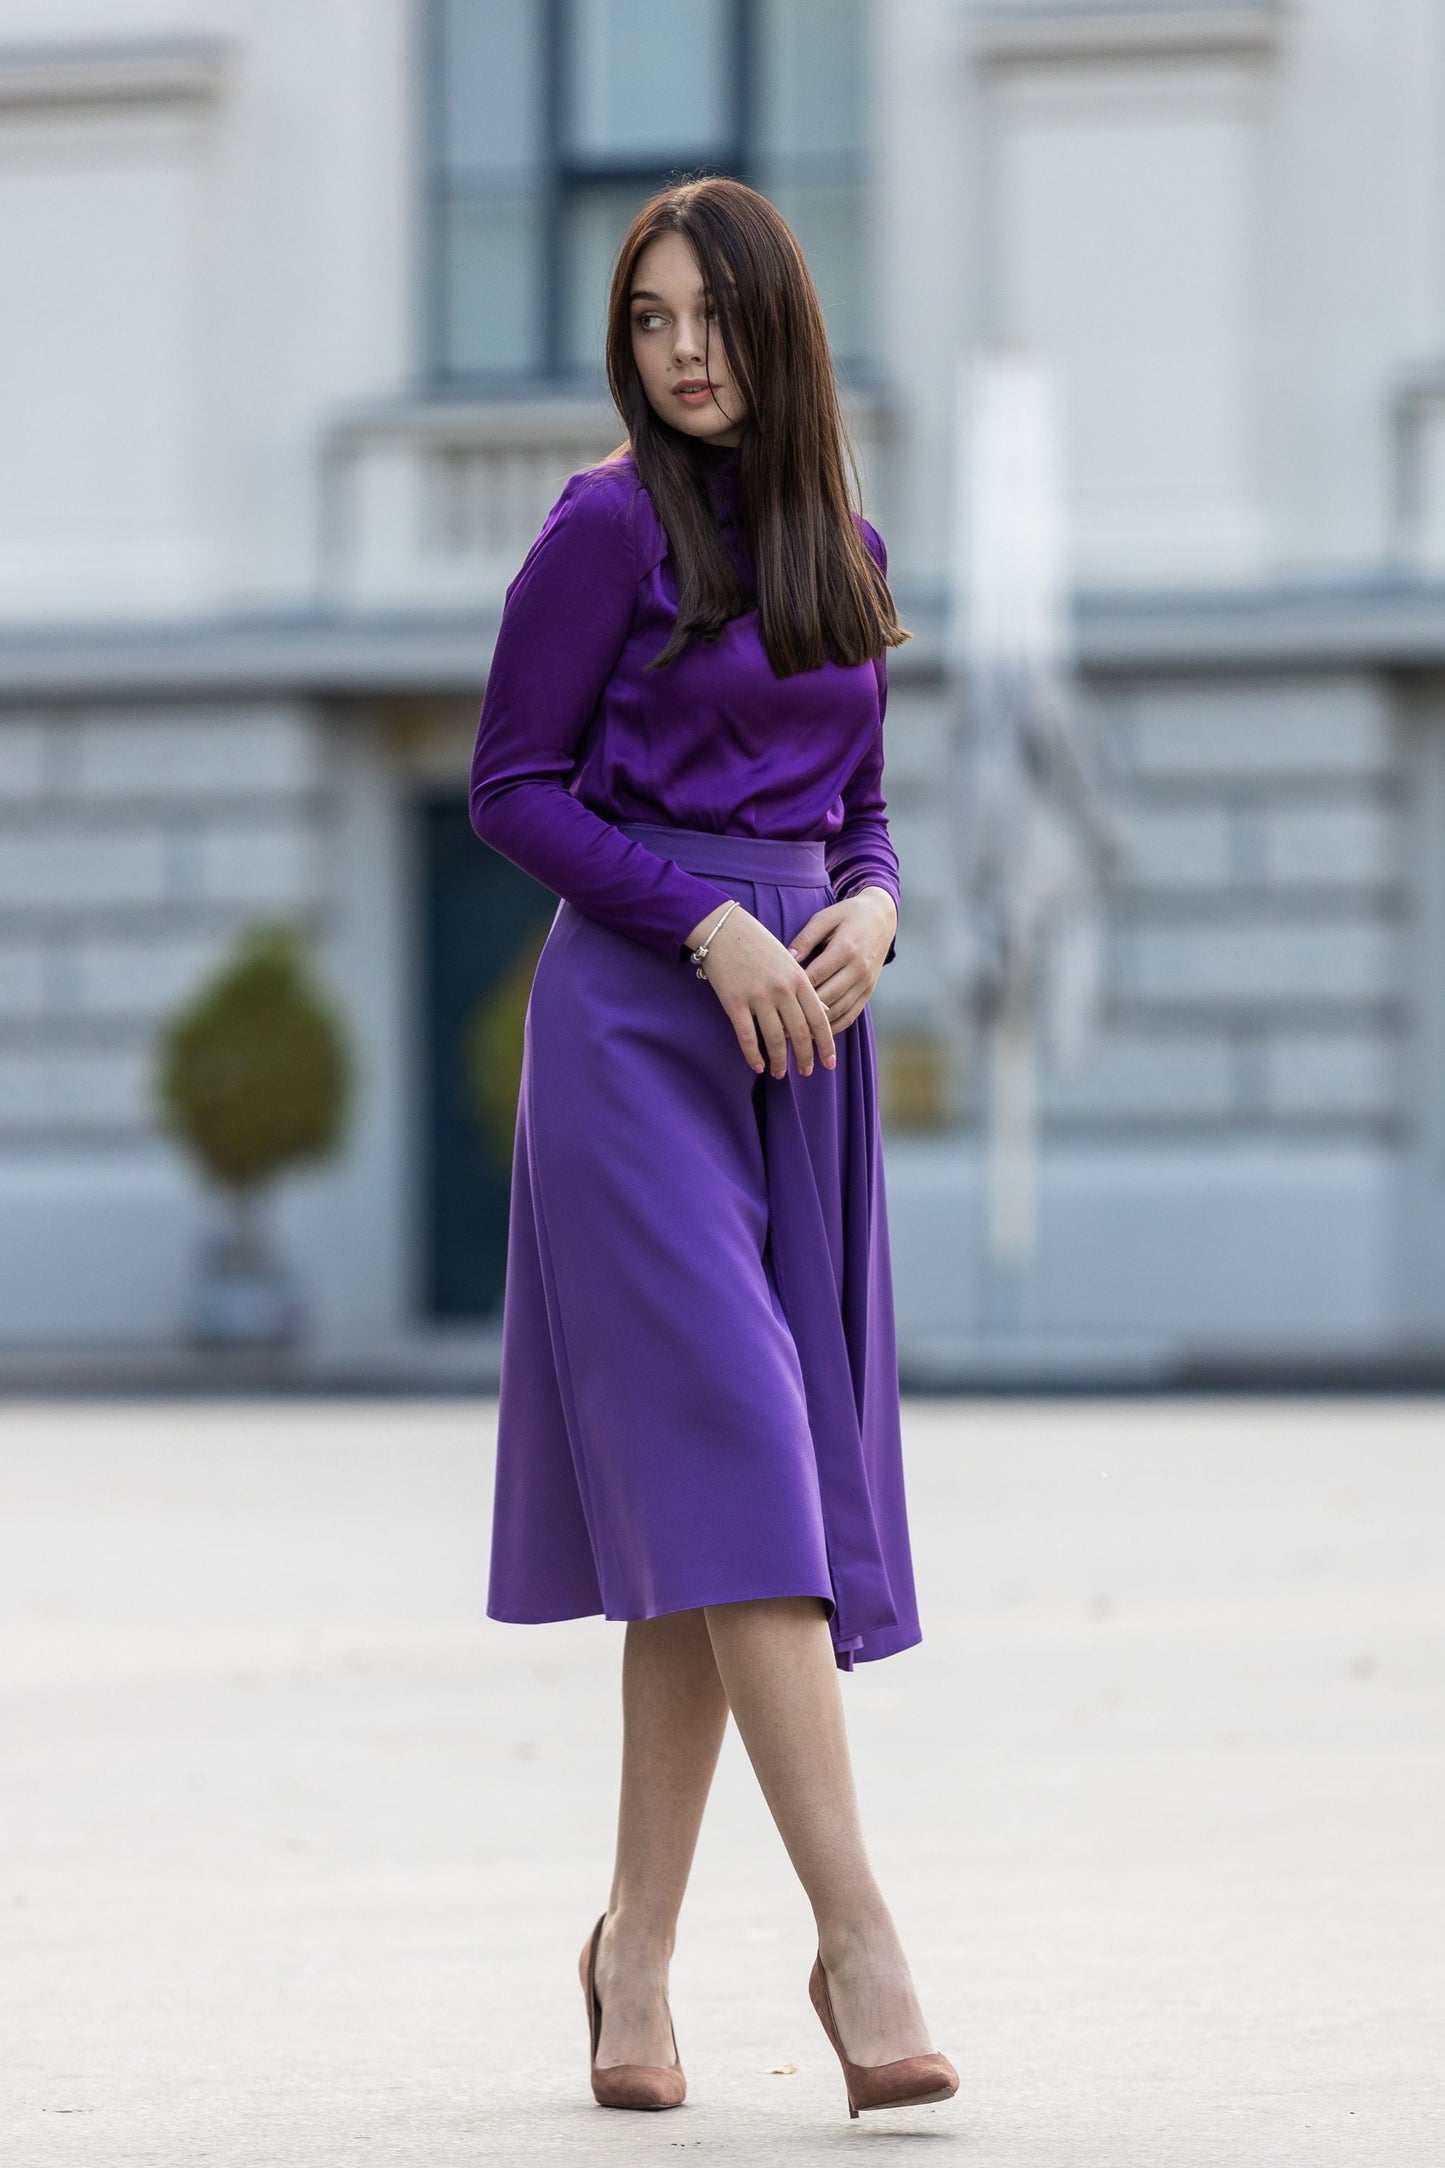 Purple classic style skirt with side folds